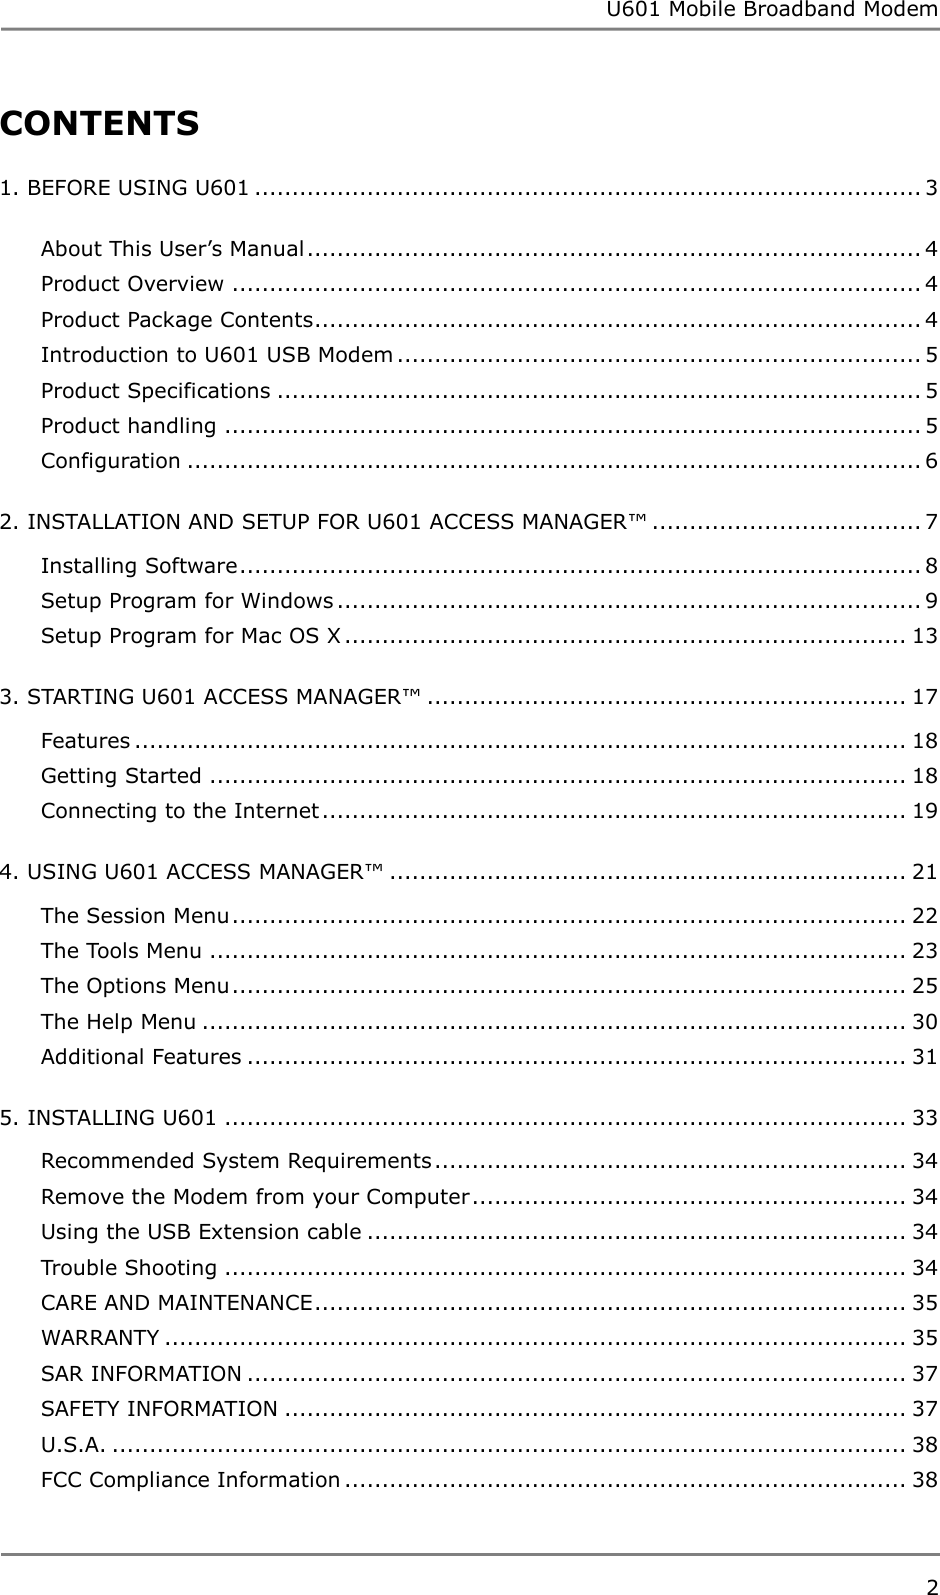 U601 Mobile Broadband Modem 2  CONTENTS 1. BEFORE USING U601 ......................................................................................... 3 About This User‟s Manual .................................................................................. 4 Product Overview ............................................................................................ 4 Product Package Contents ................................................................................. 4 Introduction to U601 USB Modem ...................................................................... 5 Product Specifications ...................................................................................... 5 Product handling ............................................................................................. 5 Configuration .................................................................................................. 6 2. INSTALLATION AND SETUP FOR U601 ACCESS MANAGER™ .................................... 7 Installing Software ........................................................................................... 8 Setup Program for Windows .............................................................................. 9 Setup Program for Mac OS X ........................................................................... 13 3. STARTING U601 ACCESS MANAGER™ ................................................................ 17 Features ....................................................................................................... 18 Getting Started ............................................................................................. 18 Connecting to the Internet .............................................................................. 19 4. USING U601 ACCESS MANAGER™ ..................................................................... 21 The Session Menu .......................................................................................... 22 The Tools Menu ............................................................................................. 23 The Options Menu .......................................................................................... 25 The Help Menu .............................................................................................. 30 Additional Features ........................................................................................ 31 5. INSTALLING U601 ........................................................................................... 33 Recommended System Requirements ............................................................... 34 Remove the Modem from your Computer .......................................................... 34 Using the USB Extension cable ........................................................................ 34 Trouble Shooting ........................................................................................... 34 CARE AND MAINTENANCE ............................................................................... 35 WARRANTY ................................................................................................... 35 SAR INFORMATION ........................................................................................ 37 SAFETY INFORMATION ................................................................................... 37 U.S.A. .......................................................................................................... 38 FCC Compliance Information ........................................................................... 38    